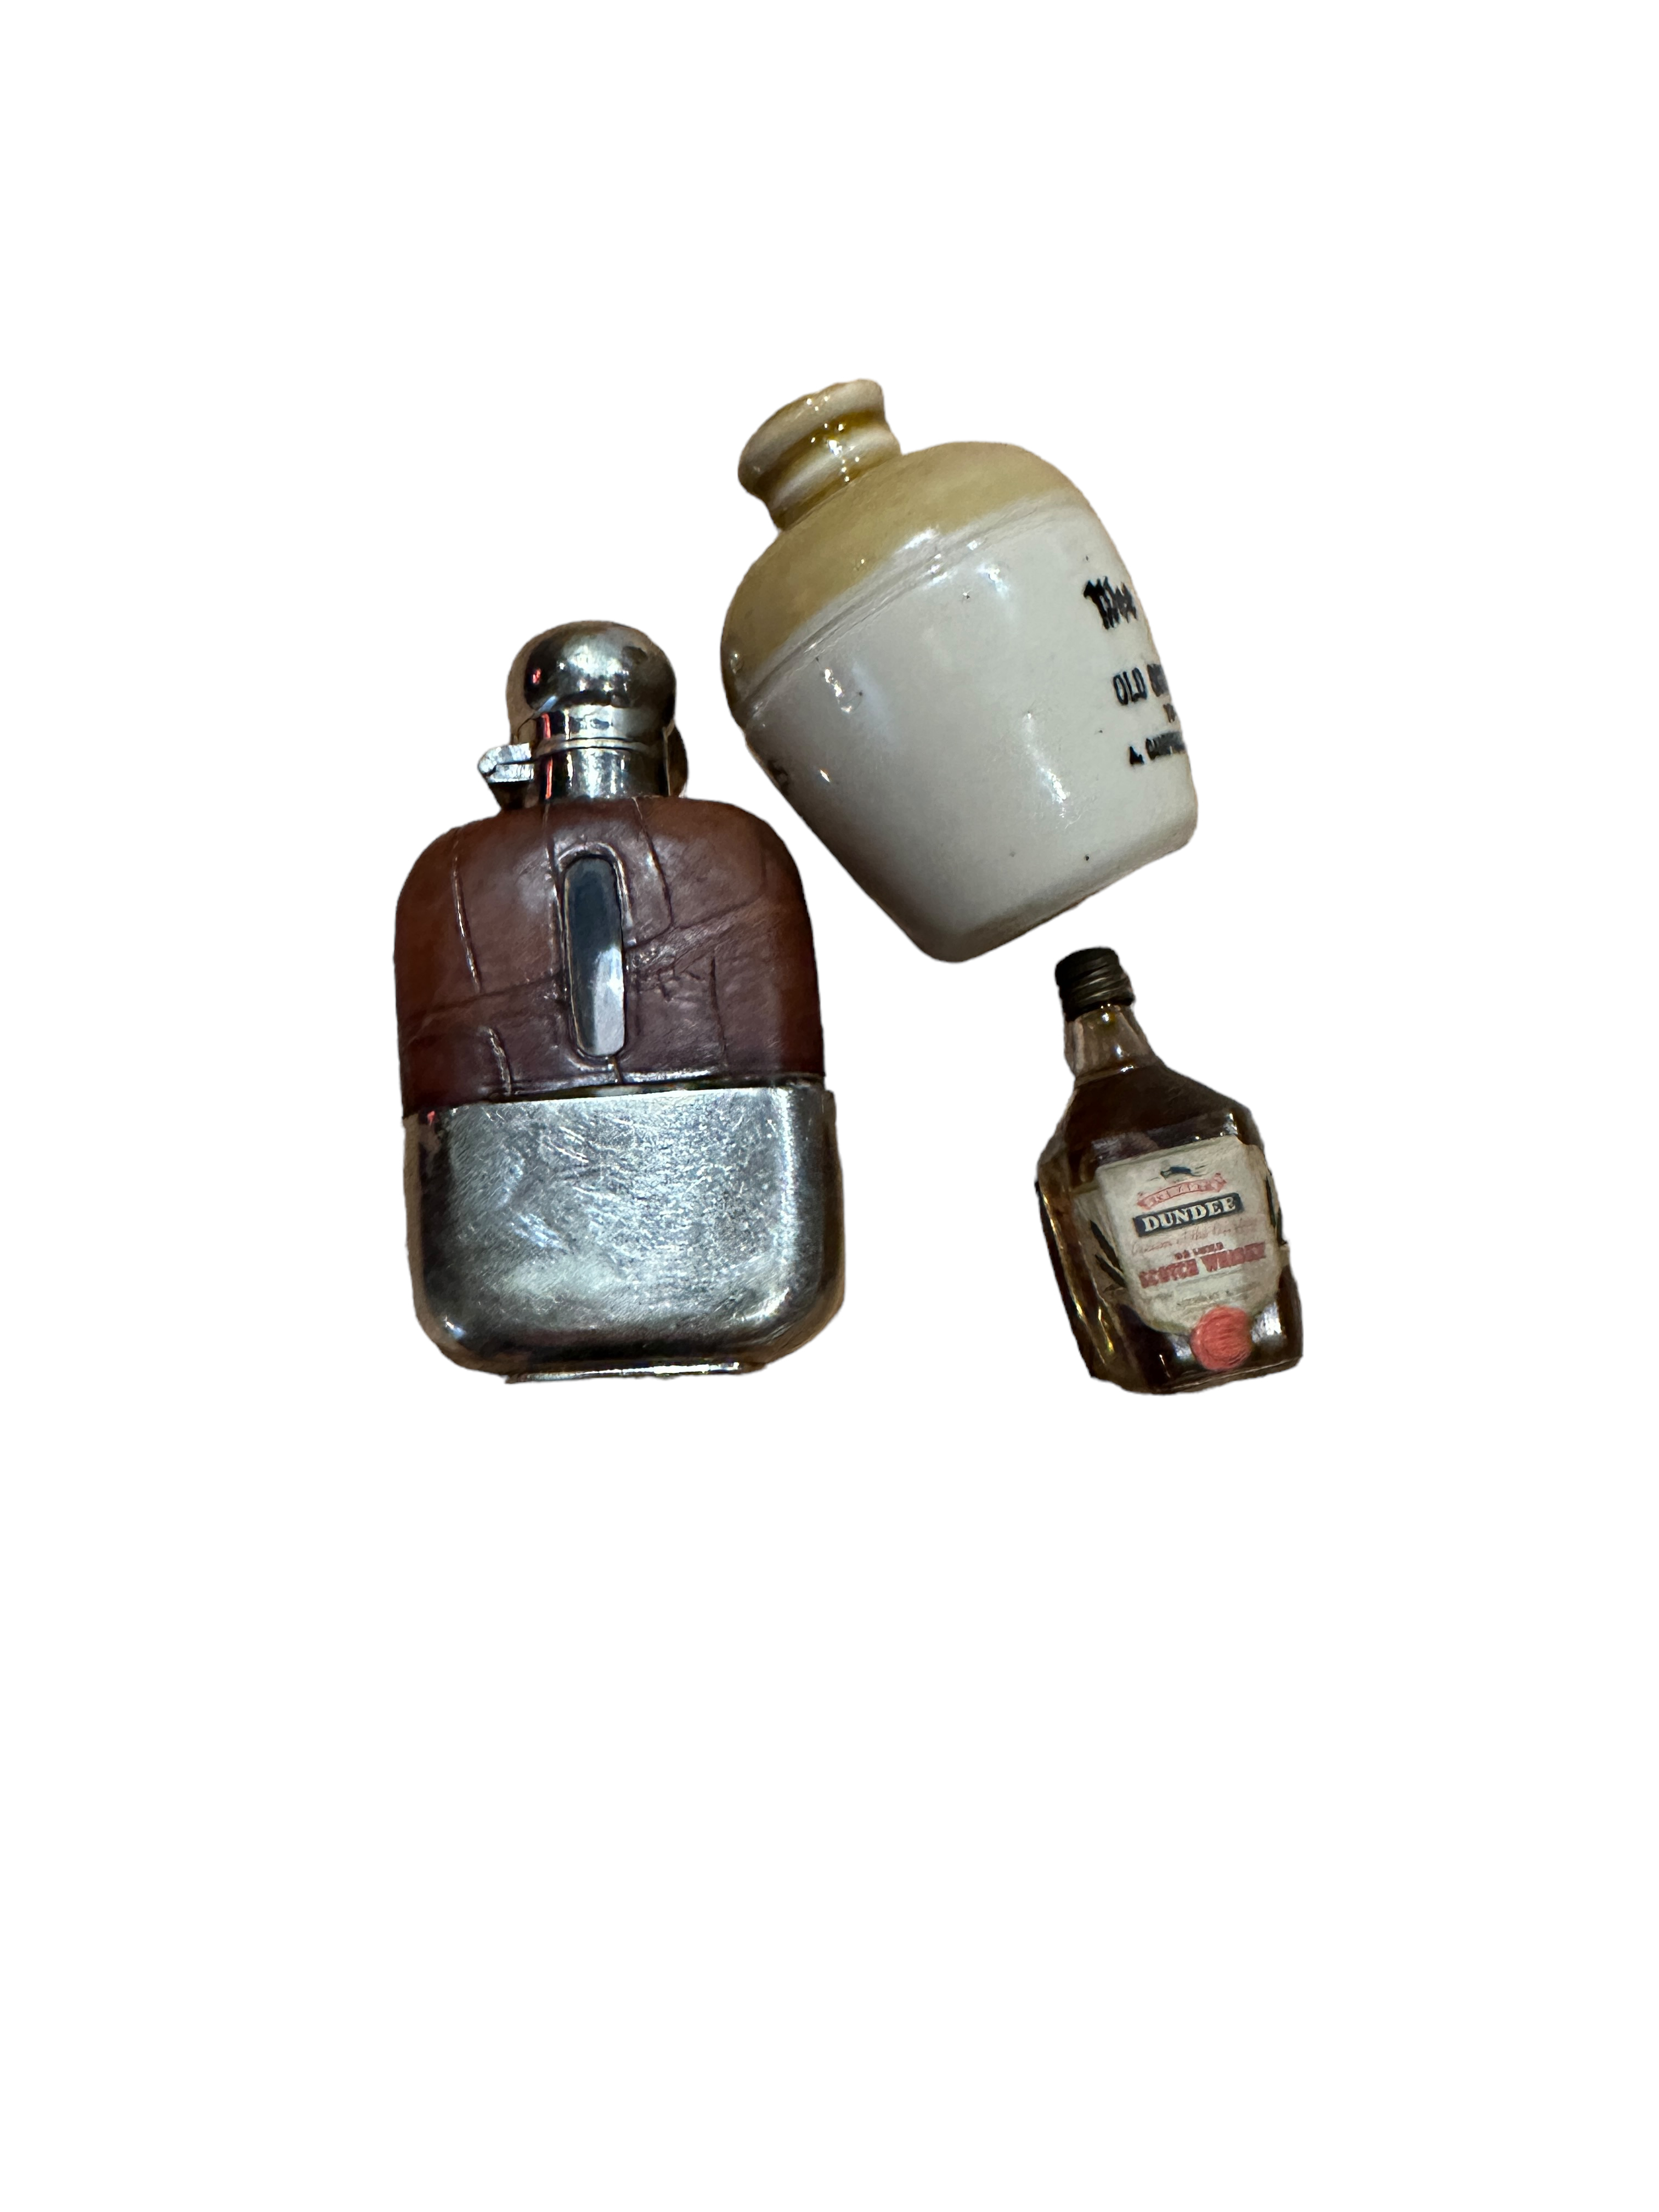 Lot of Small Antique Silver Plated and Leather Whisky Flask - 4" tall and odds. - Image 2 of 3